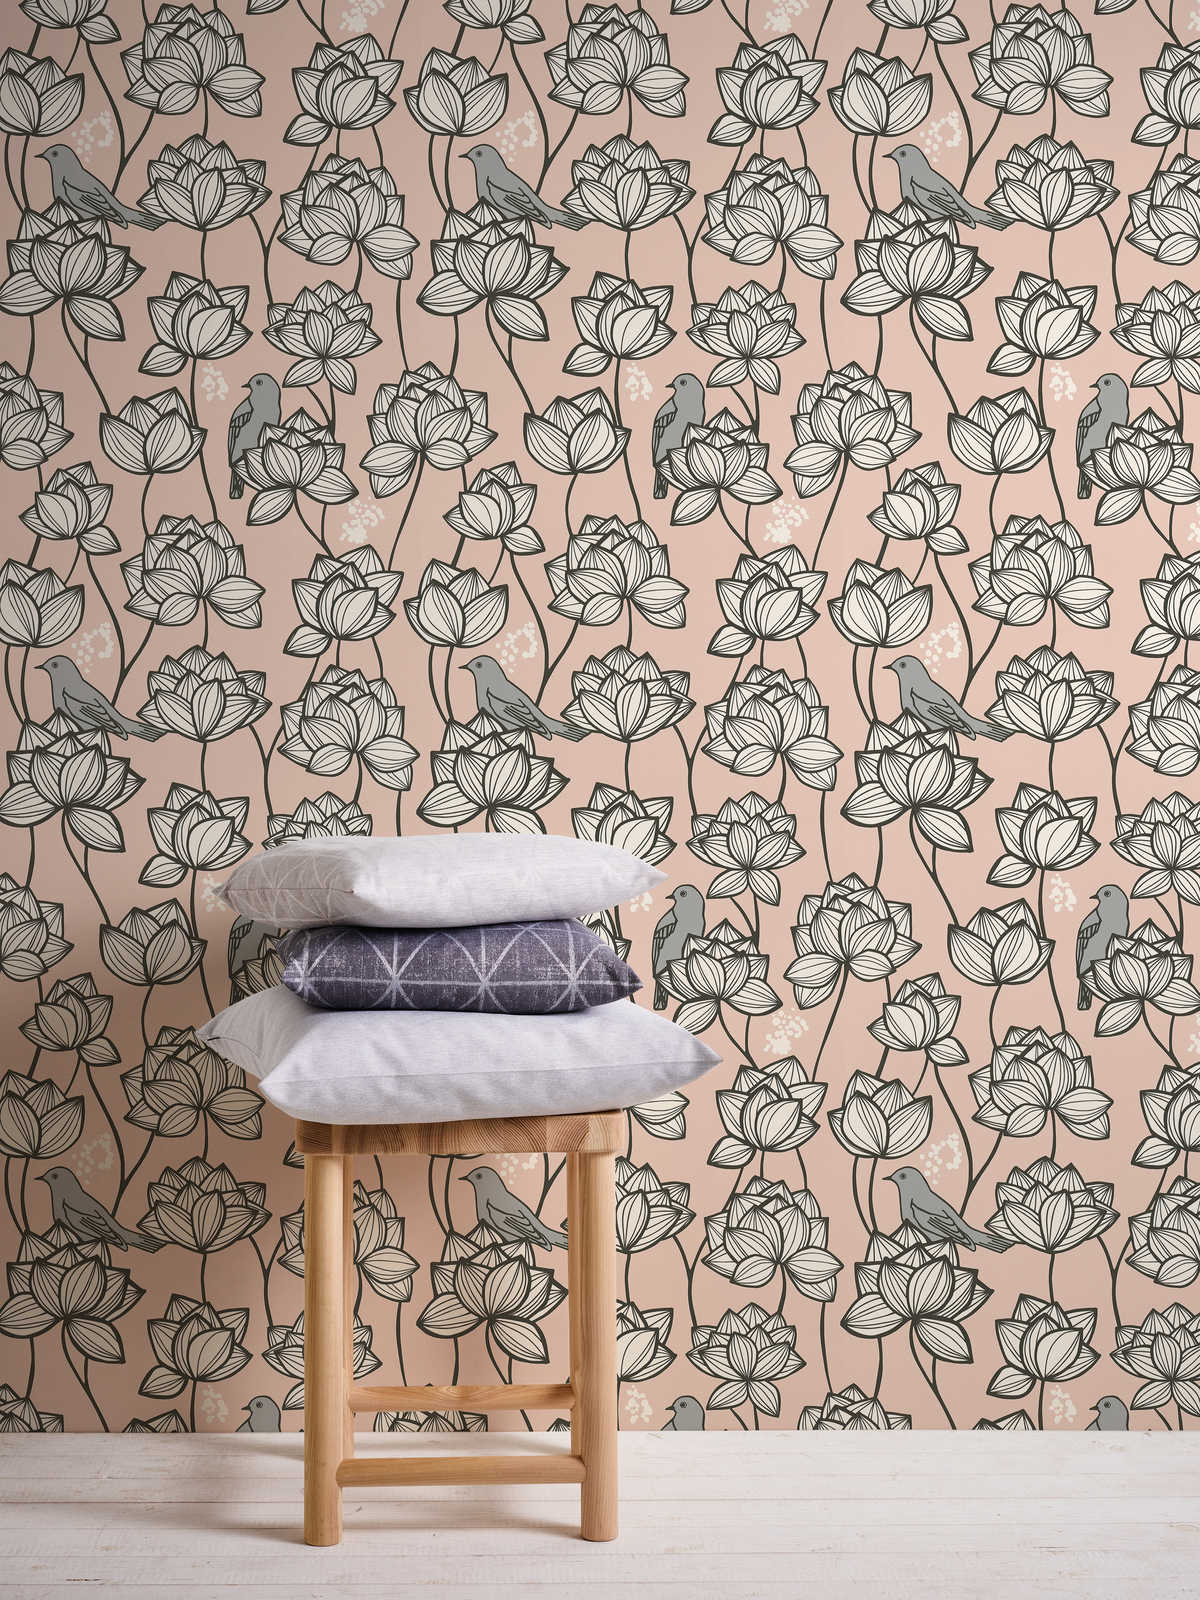             Non-woven wallpaper flowers vines with birds in line art style - grey, pink
        